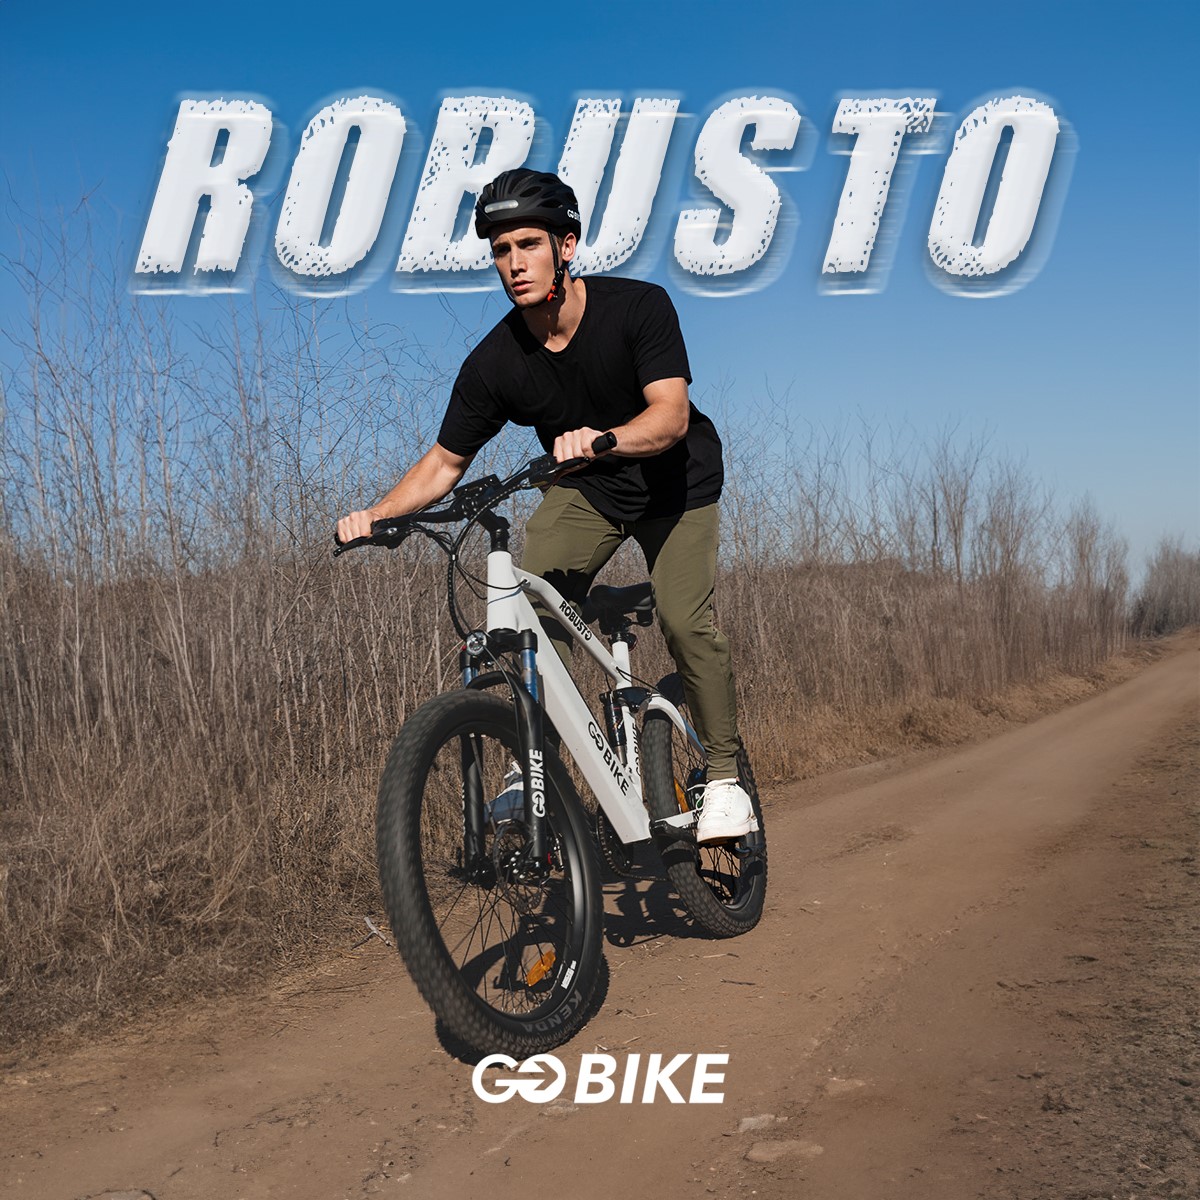 🚴‍♂️ Explore more with GOBIKE ROBUSTO! 750W power, full suspension, 26' tires for all terrains.

🚀 Lightweight, durable, and smooth 7-speed shifting. Ready for any adventure!

#ElectricGoBike #RideTheAdventure #OffRoadBiking #EbikeLifestyle #AdventureCycling